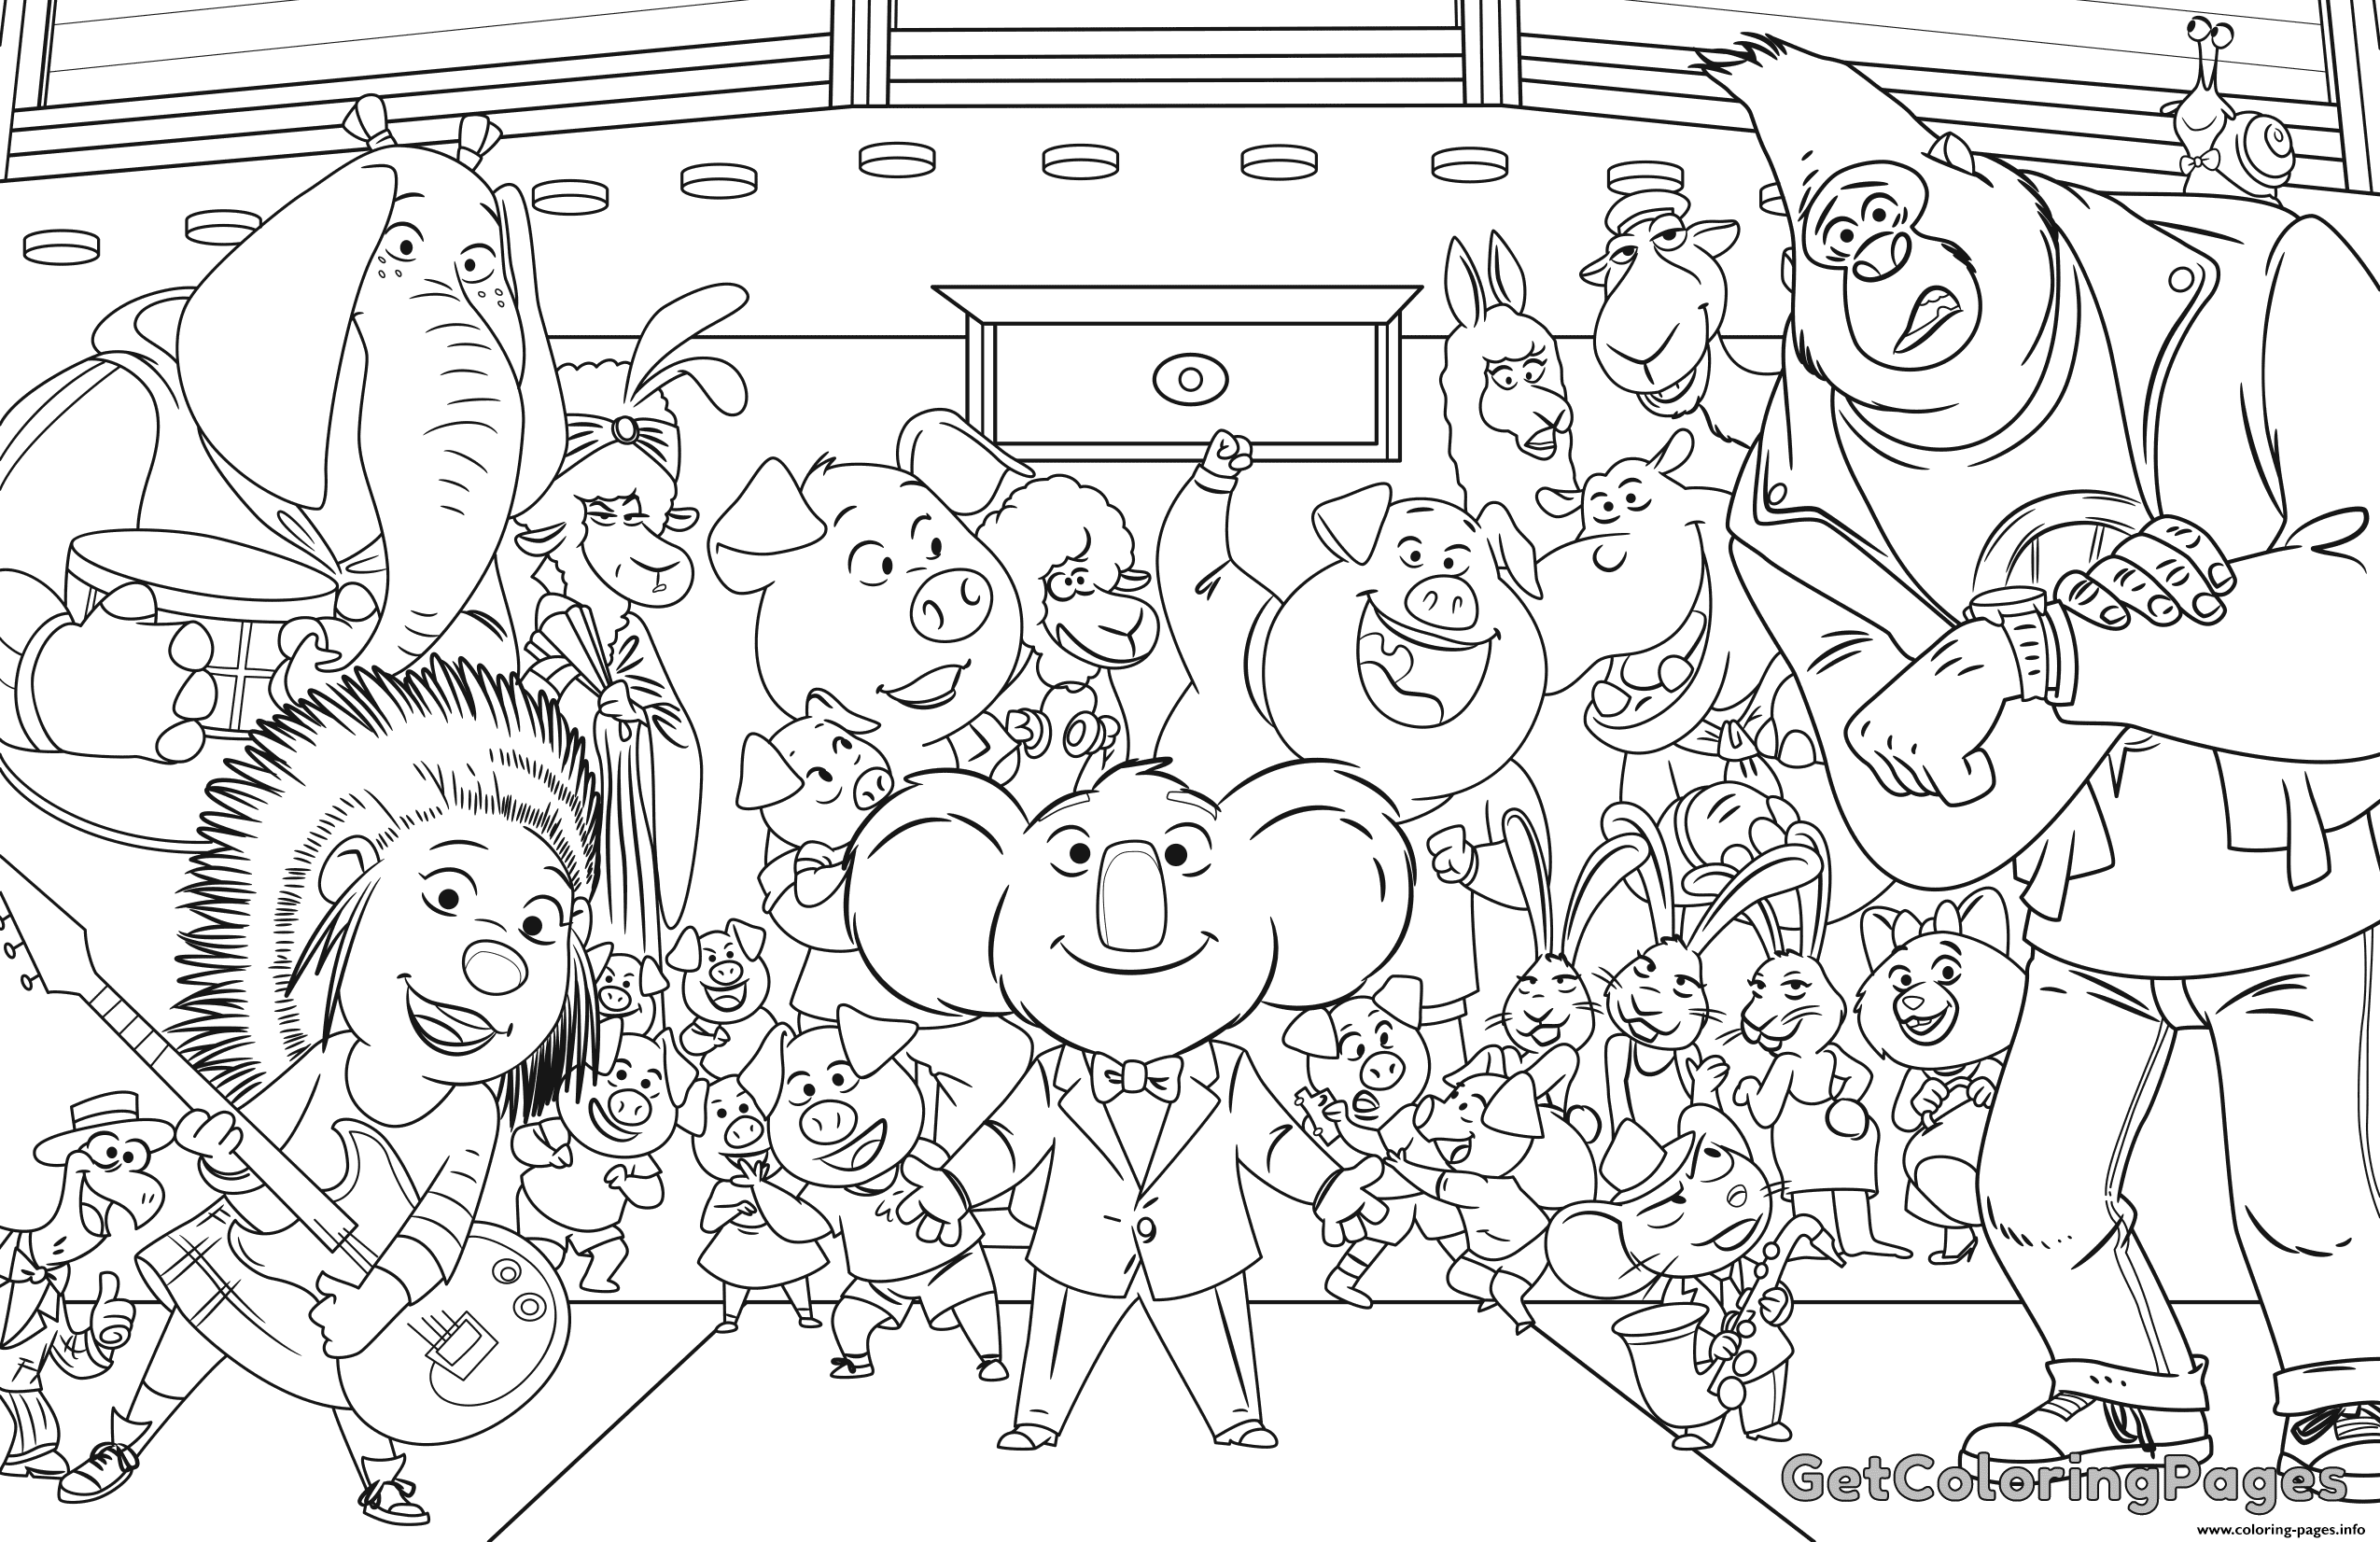 1486331863Sing-Colouring-Page